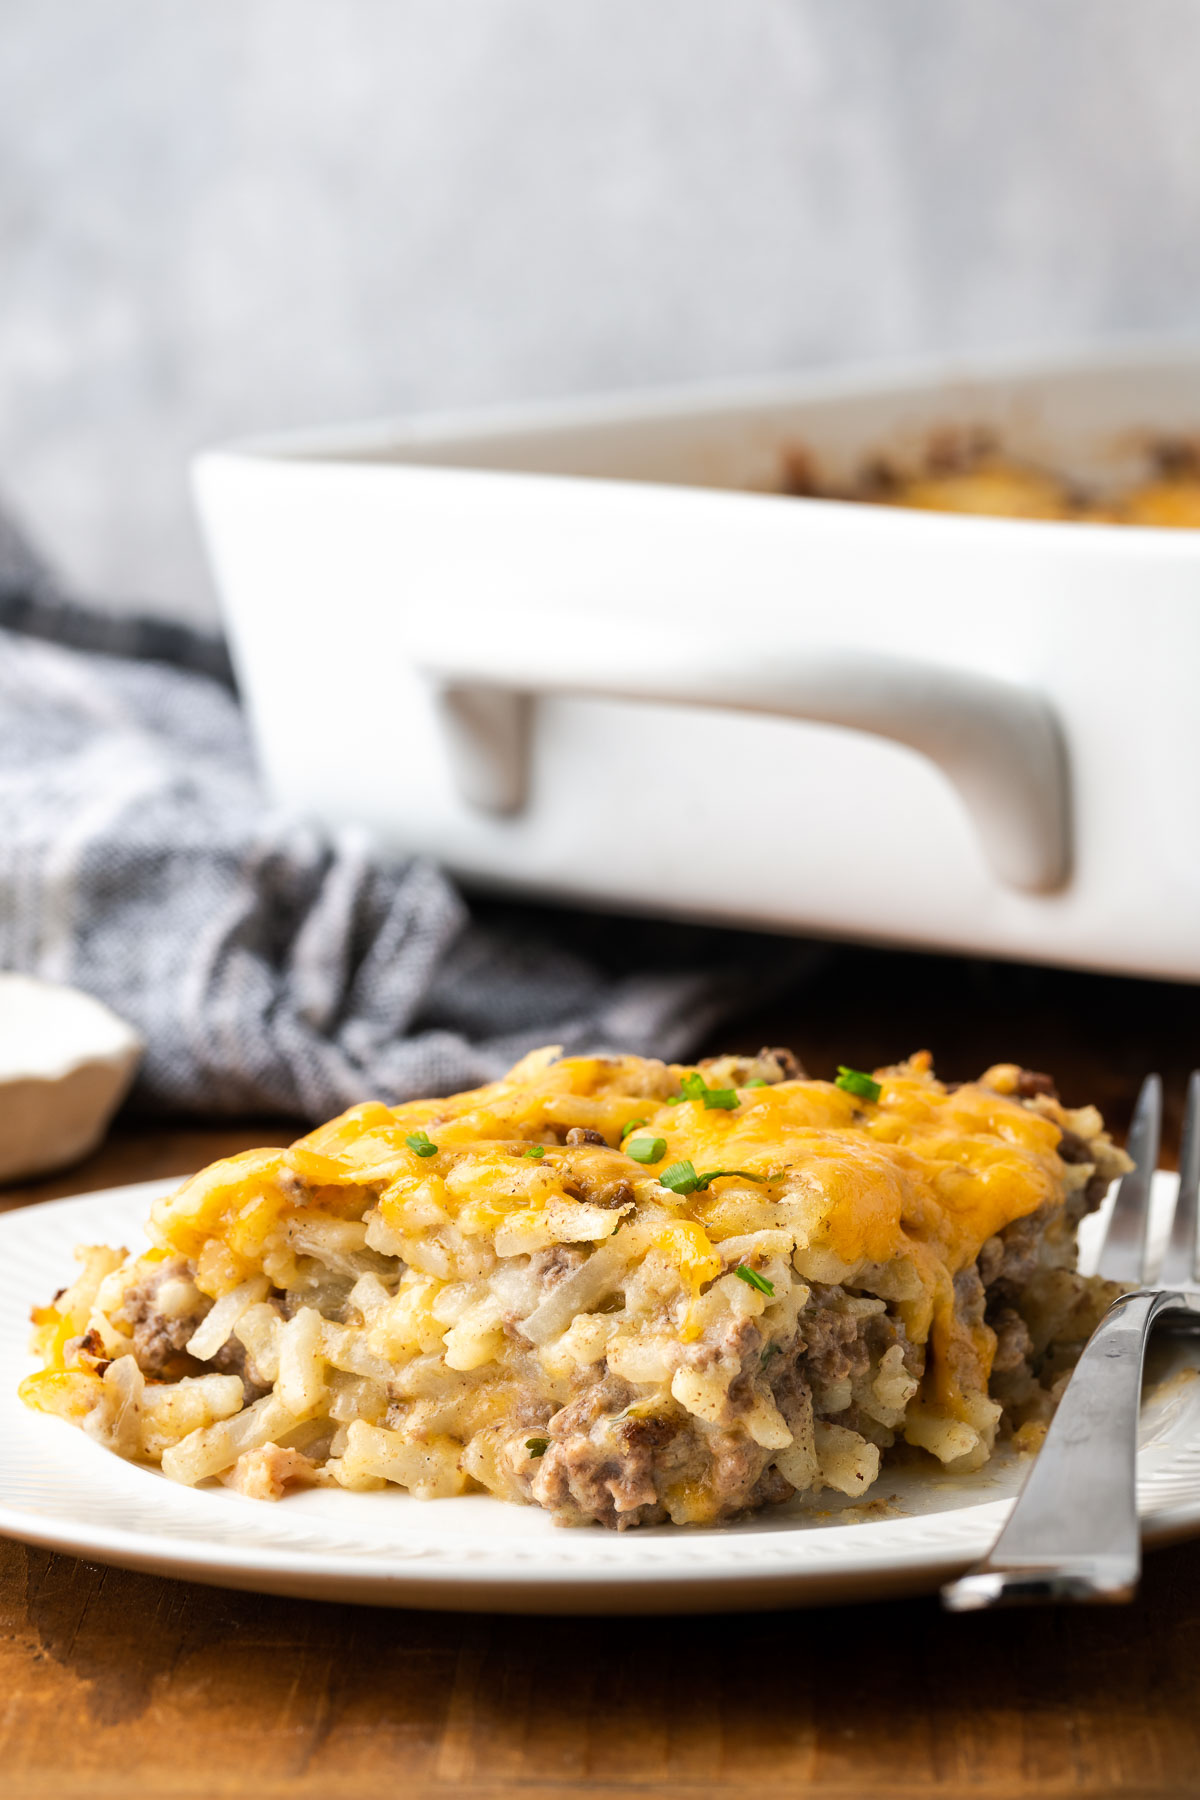 Plated slice of ground beef hash brown casserole.